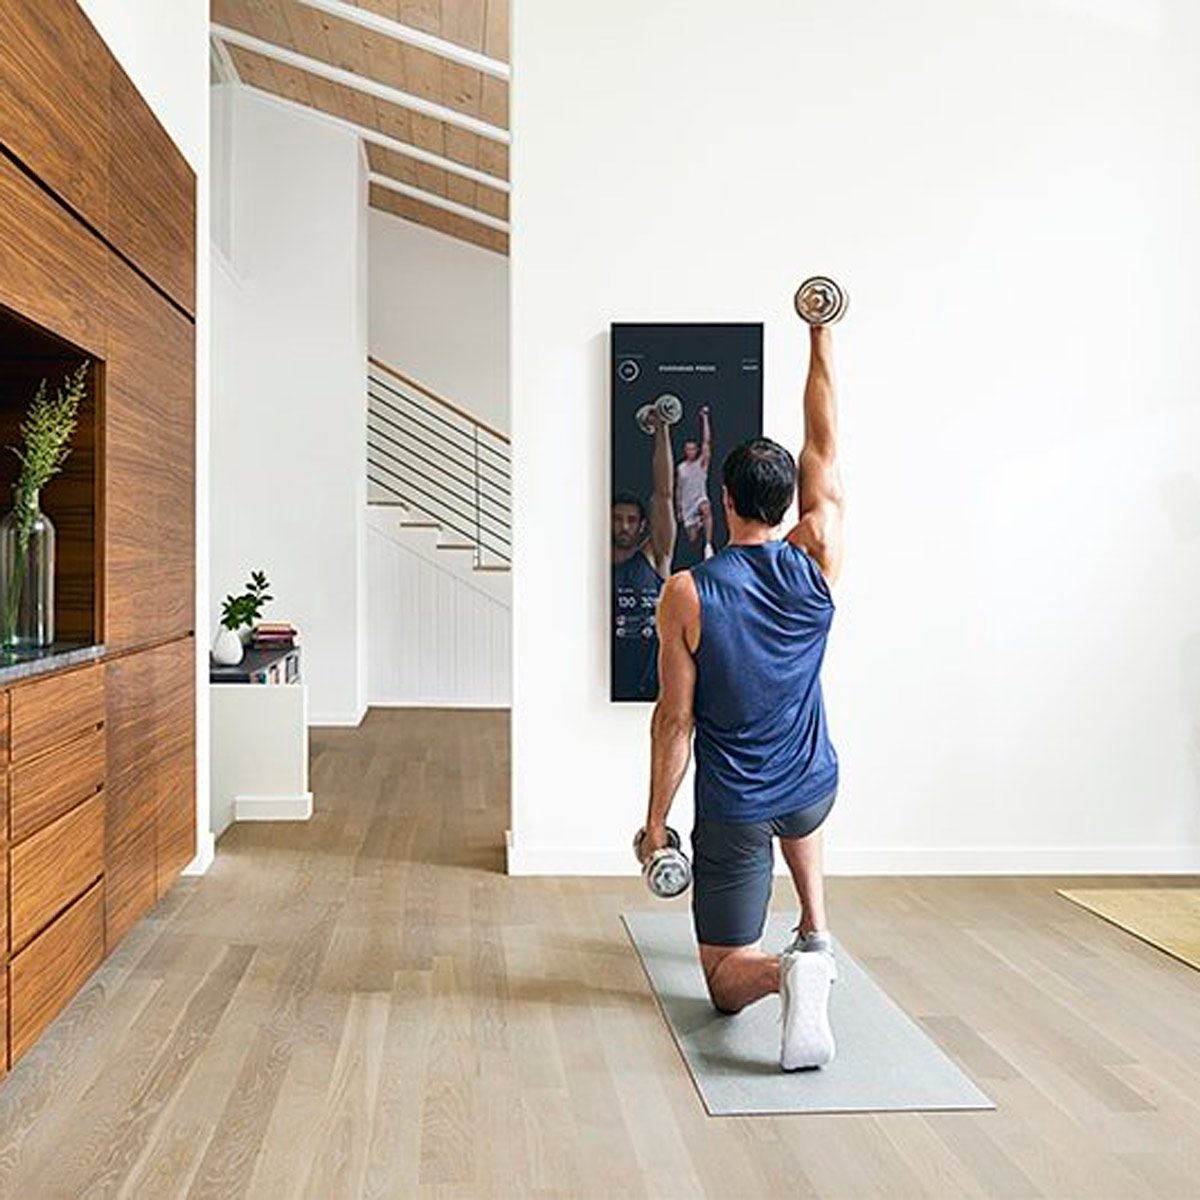 10 Products You Ll Want To Buy To Diy A Stylish Home Gym Family